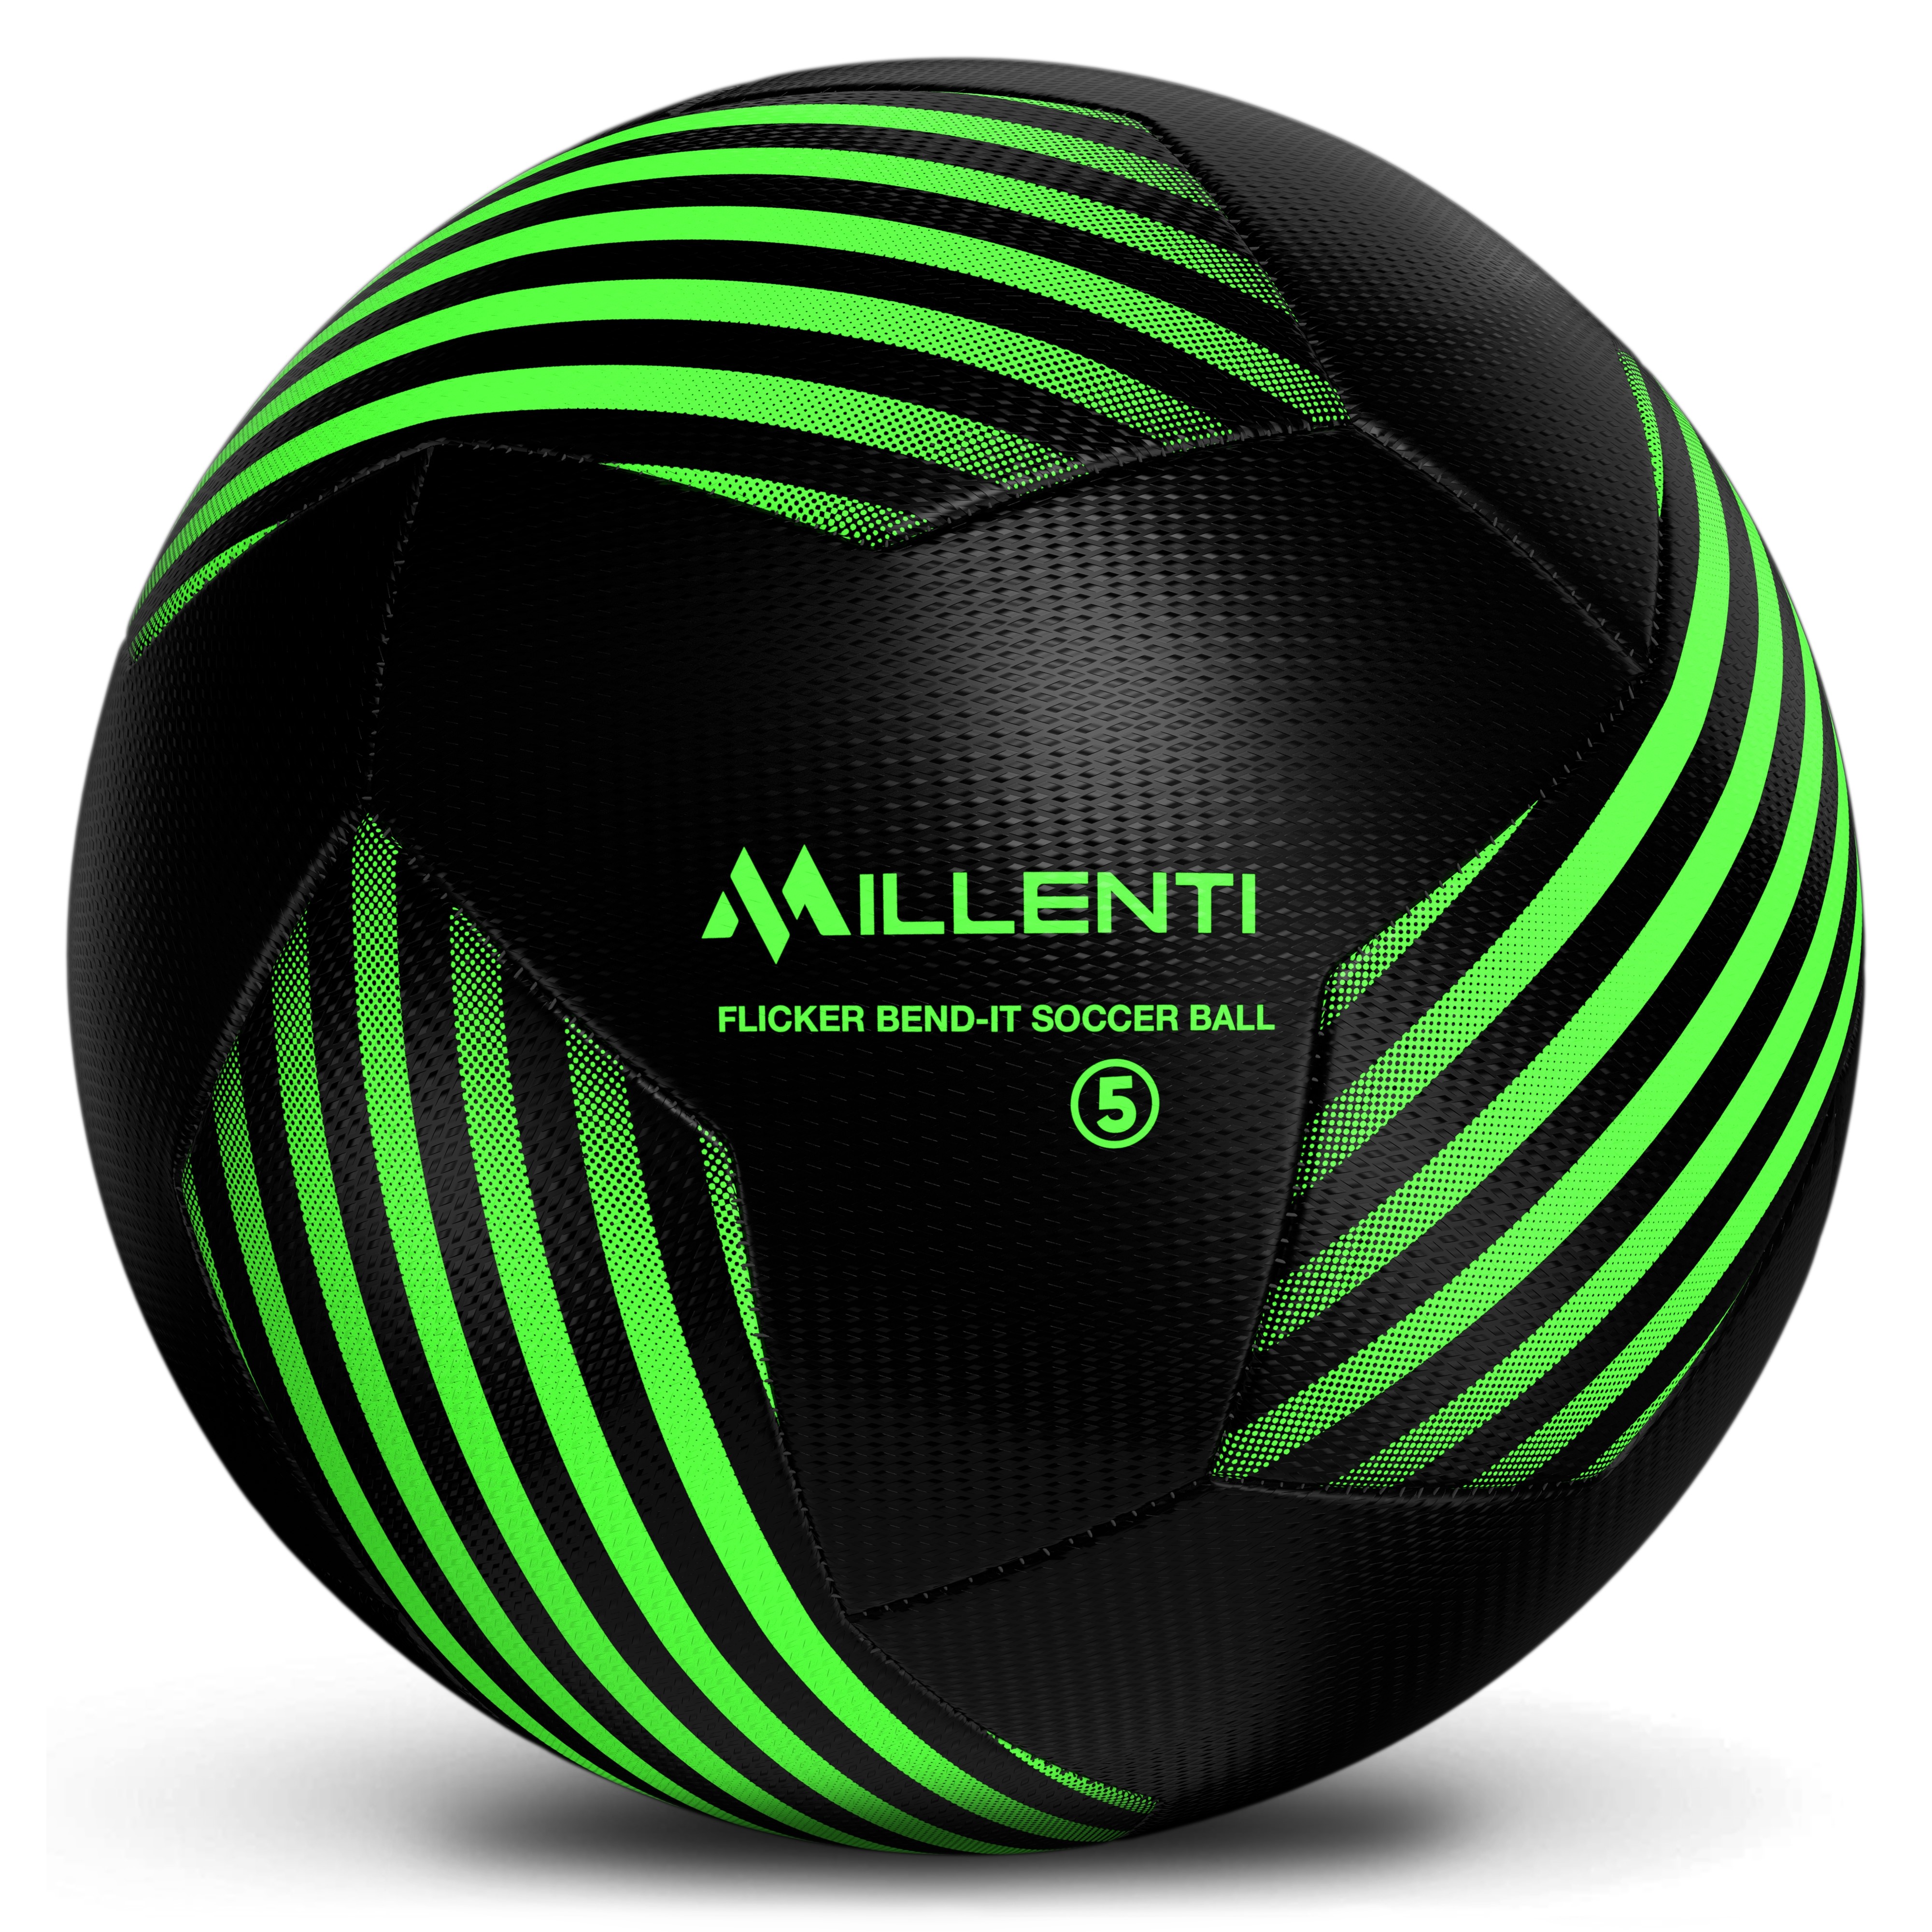 Millenti Soccer Balls Size 5 - Flicker Bend-It Soccer Ball - Curve Ball - With High-Visibility, Easy-To-Track Designs, Green SoccerBall, SB0605GN   